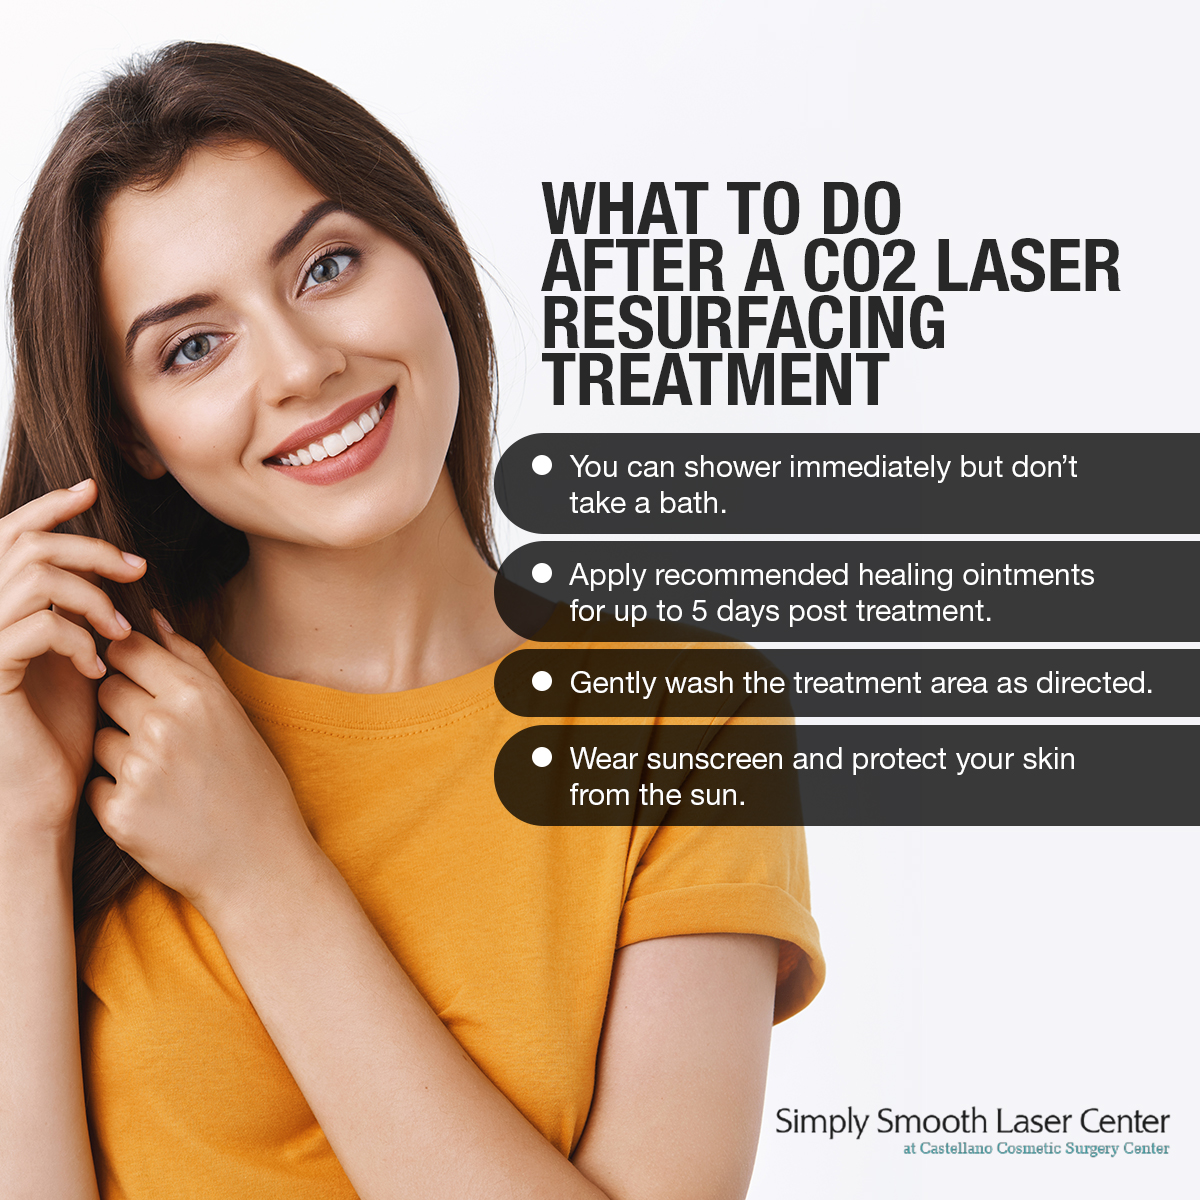 What to do after a CO2 Laser Resurfacing Treatment